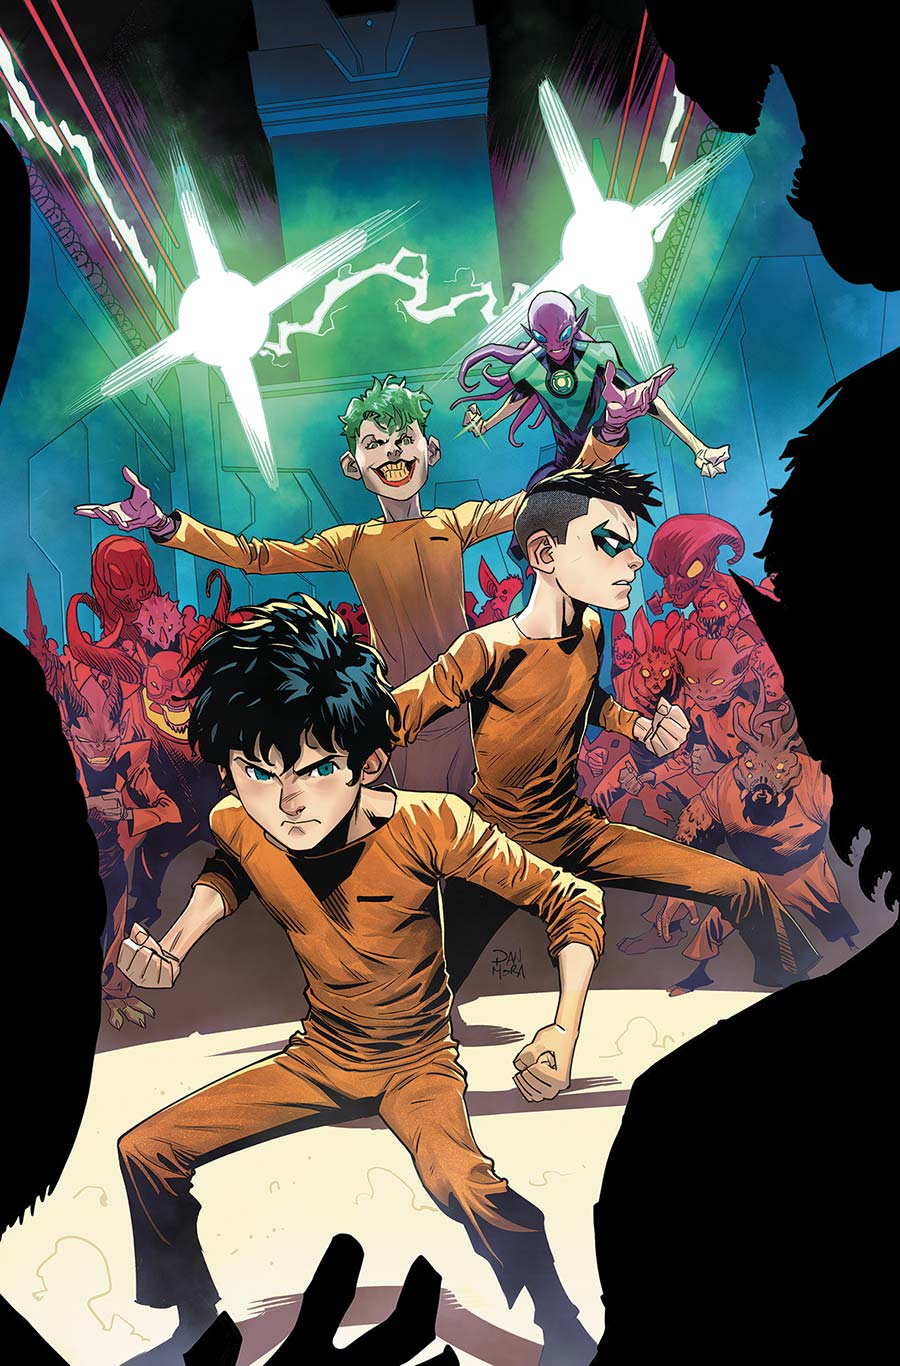 Adventures Of The Super Sons